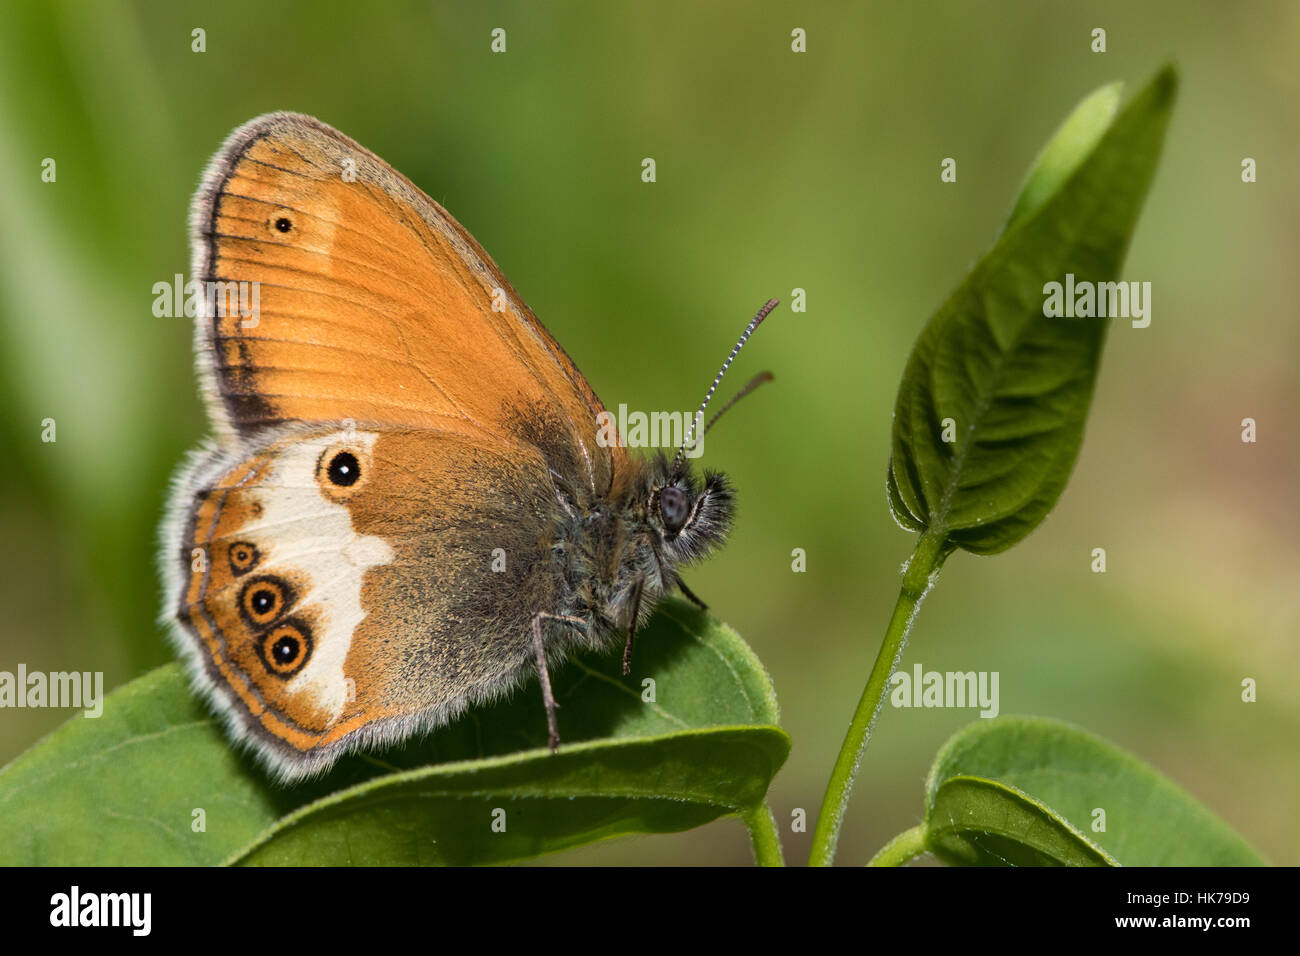 Pearly Heath (Coenonympha arcania) butterfly resting on a leaf Stock Photo